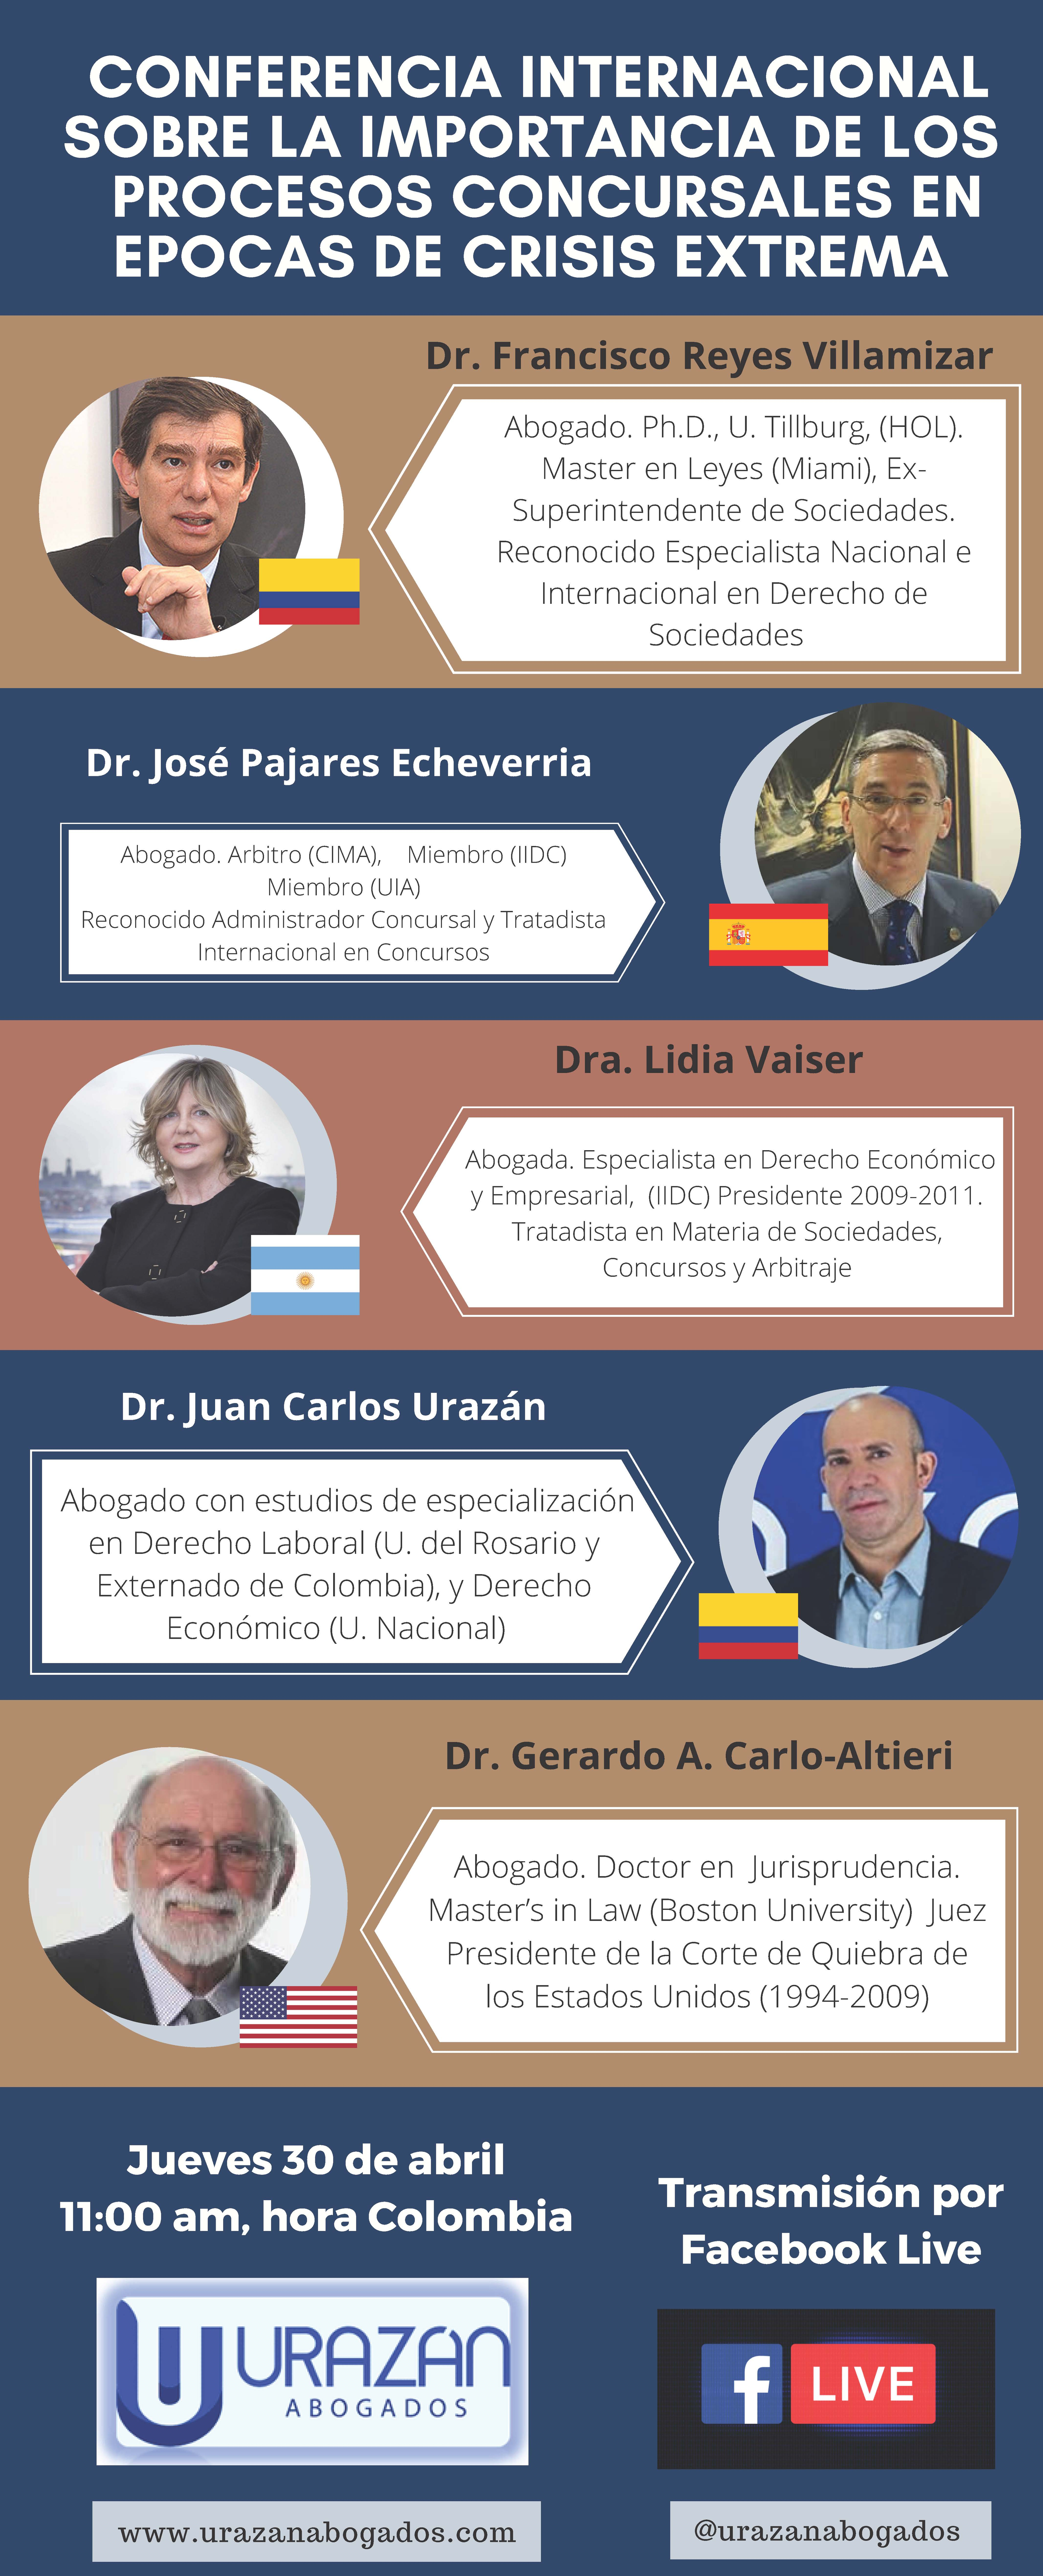 COLOMBIAN INTERNATIONAL CONFERENCE